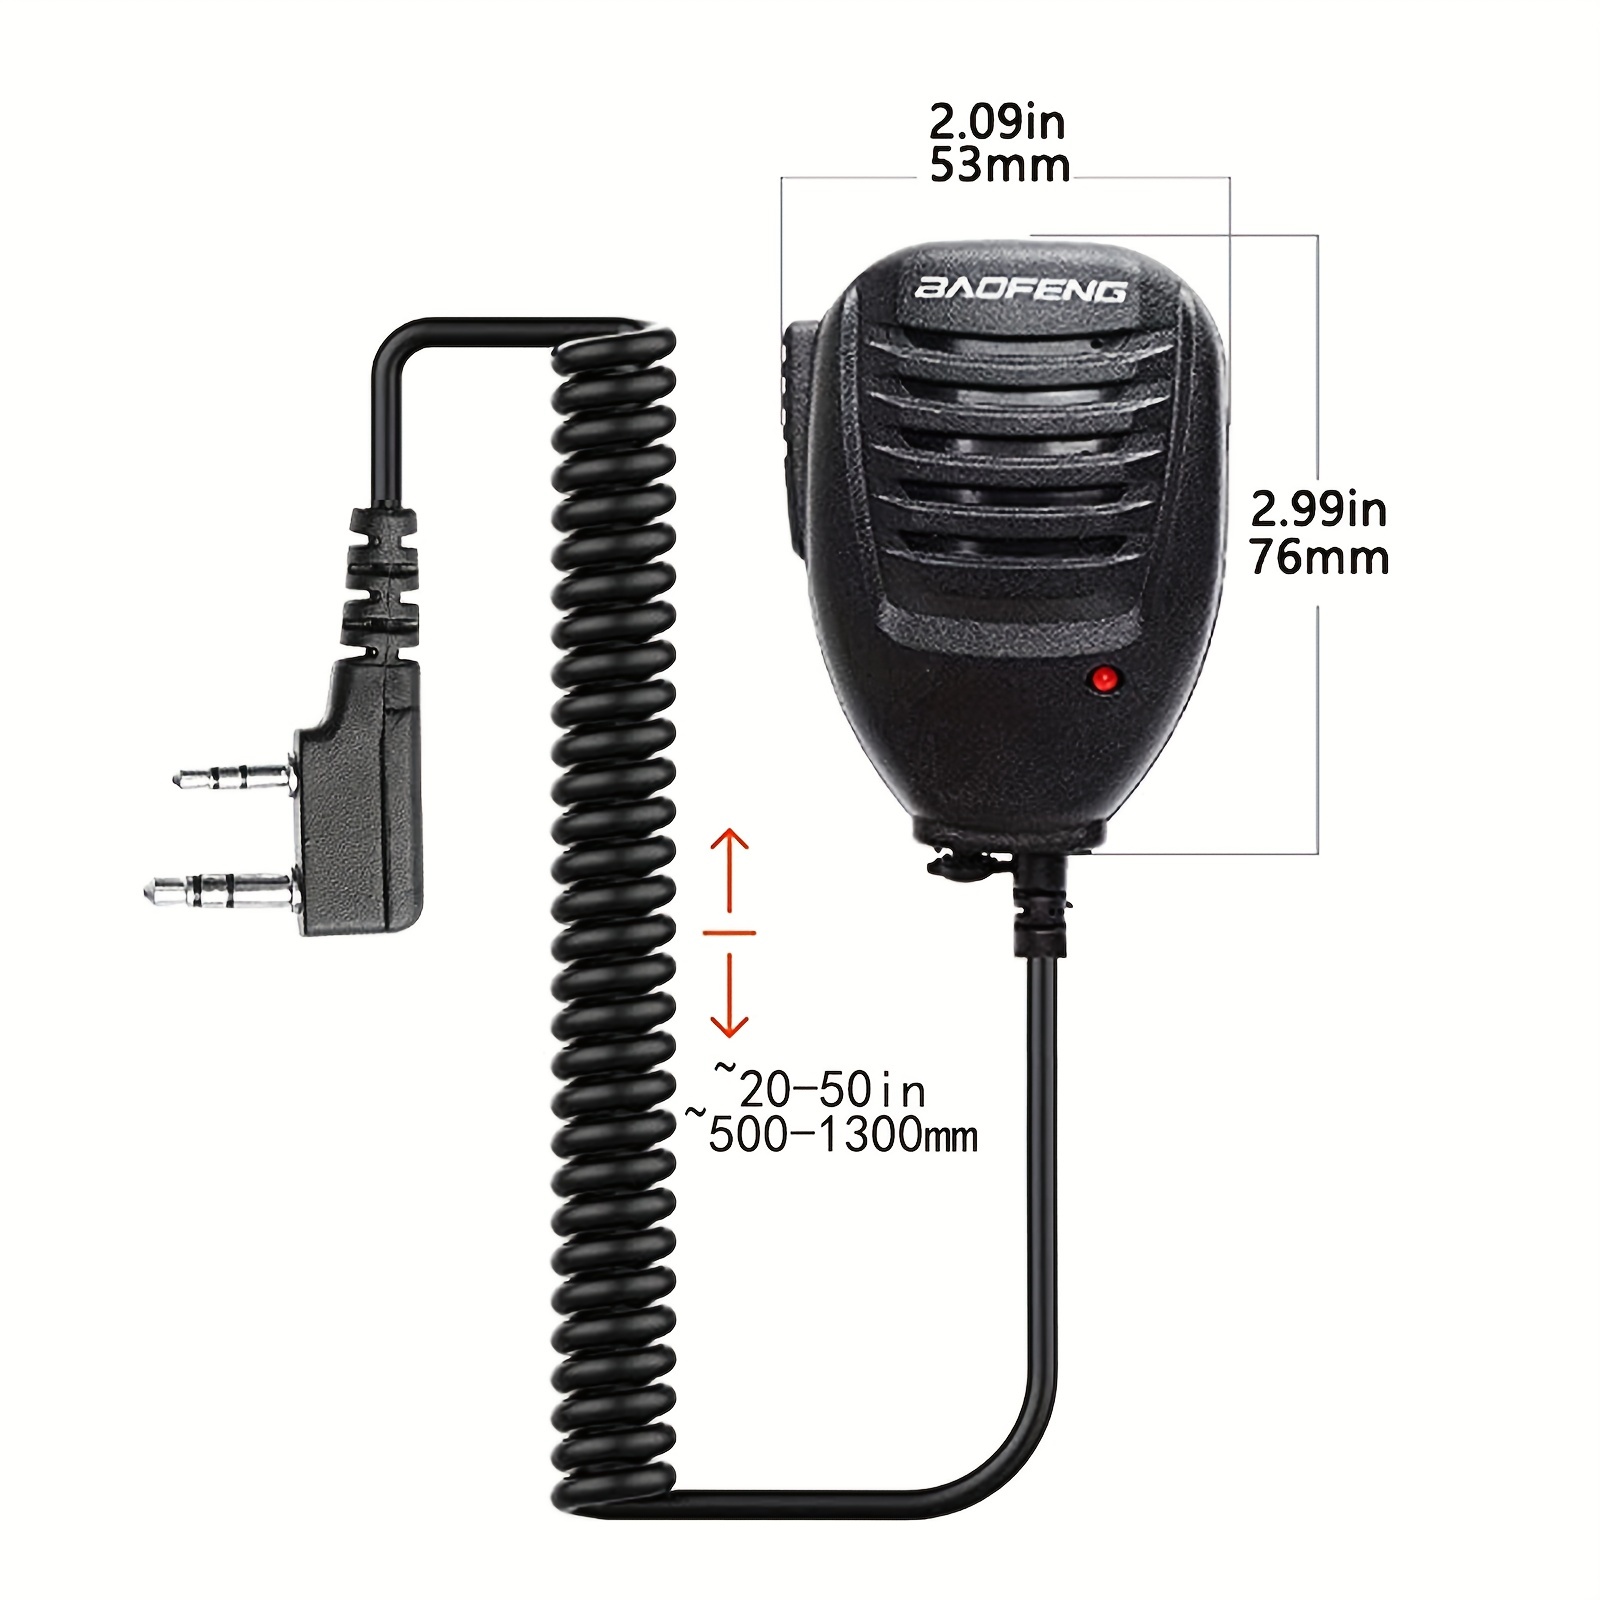 Baofeng Handheld Speaker Mic For Two Way Radios Remote Shoulder Mic  Compatible With Uv-5r, Bf-888s, Uv-82, Uv-s9, Bf-f8 Uv-10r, Uv-11r, Bf-h6,  Gt-3, Gm-15pro Clear Communication For Ham Radio And